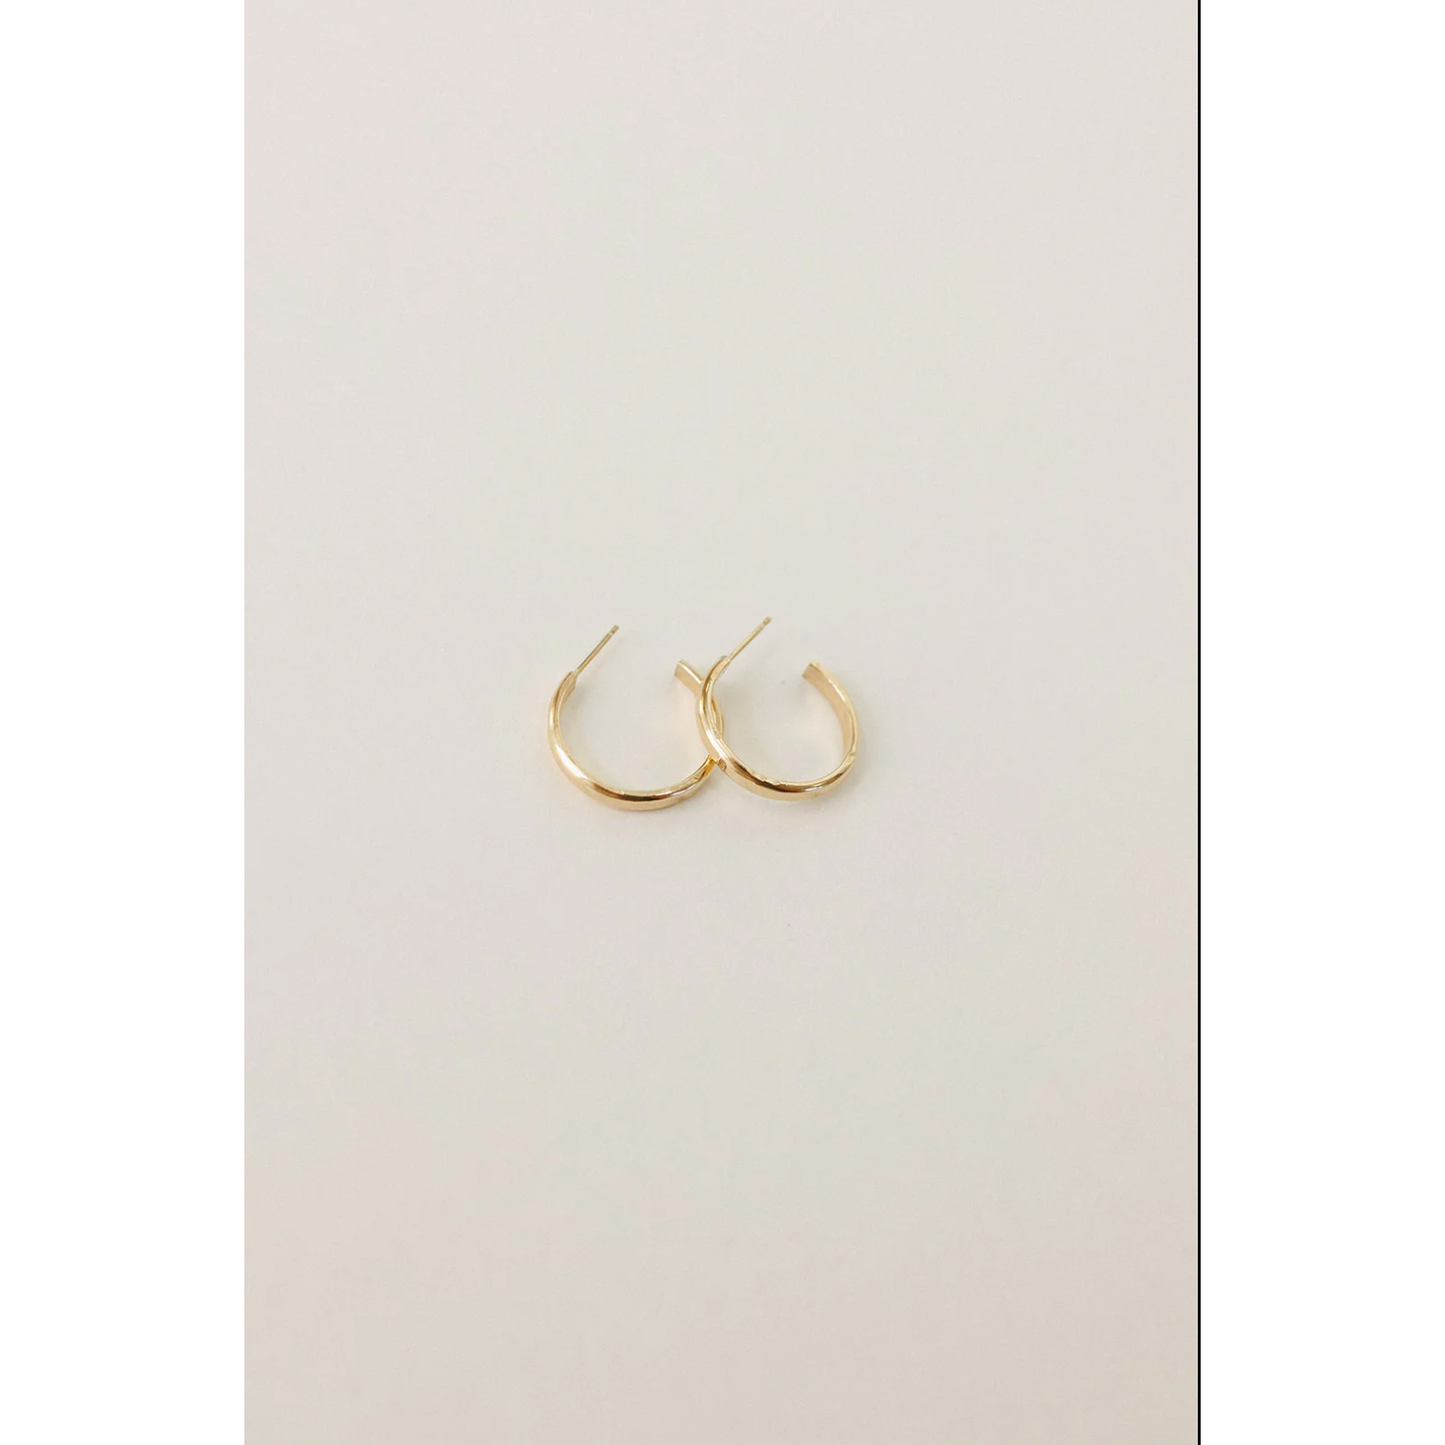 Our Spare Change Hammered Hoops